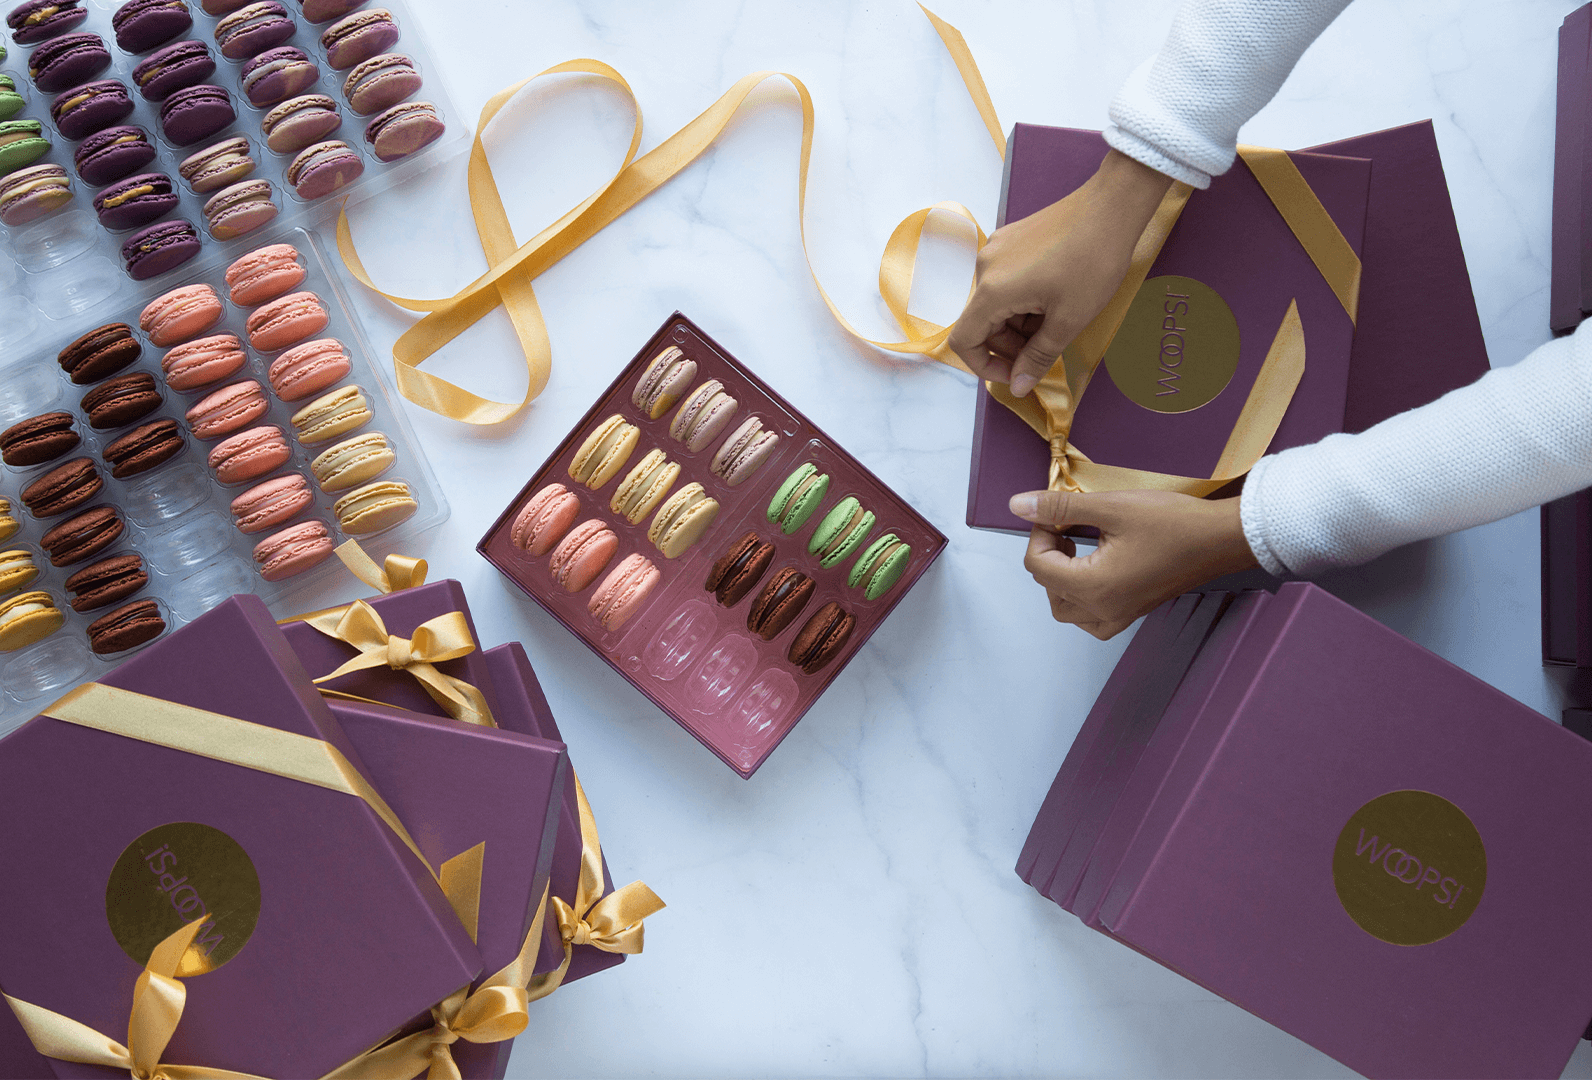 A box full of assorted French macarons is surrounded by several French macaron boxes with Holiday sleeves